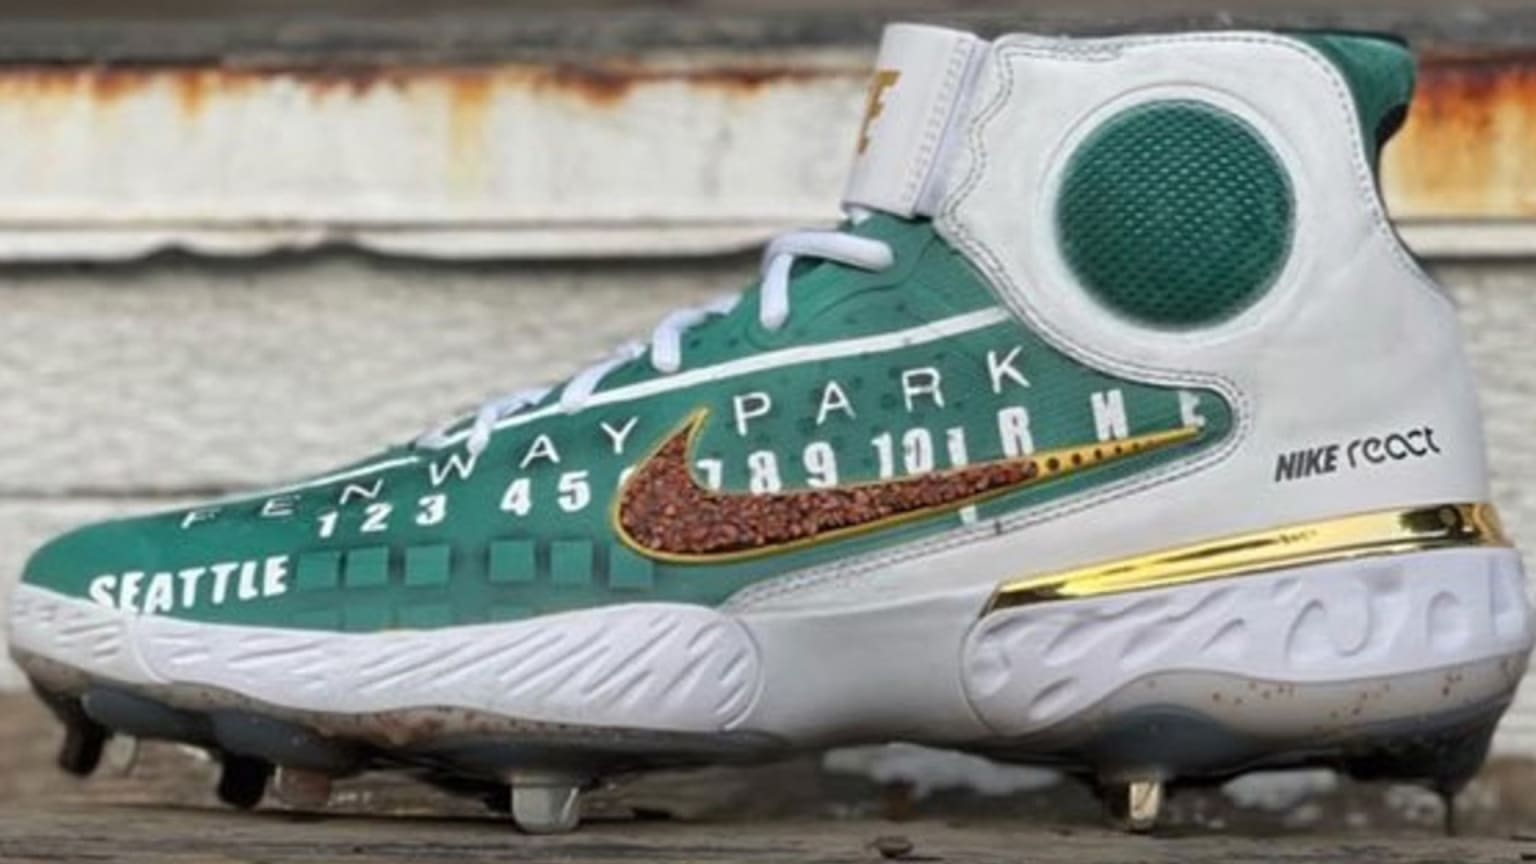 An image of the Fenway Park scoreboard and dirt from the stadium are featured on a cleat